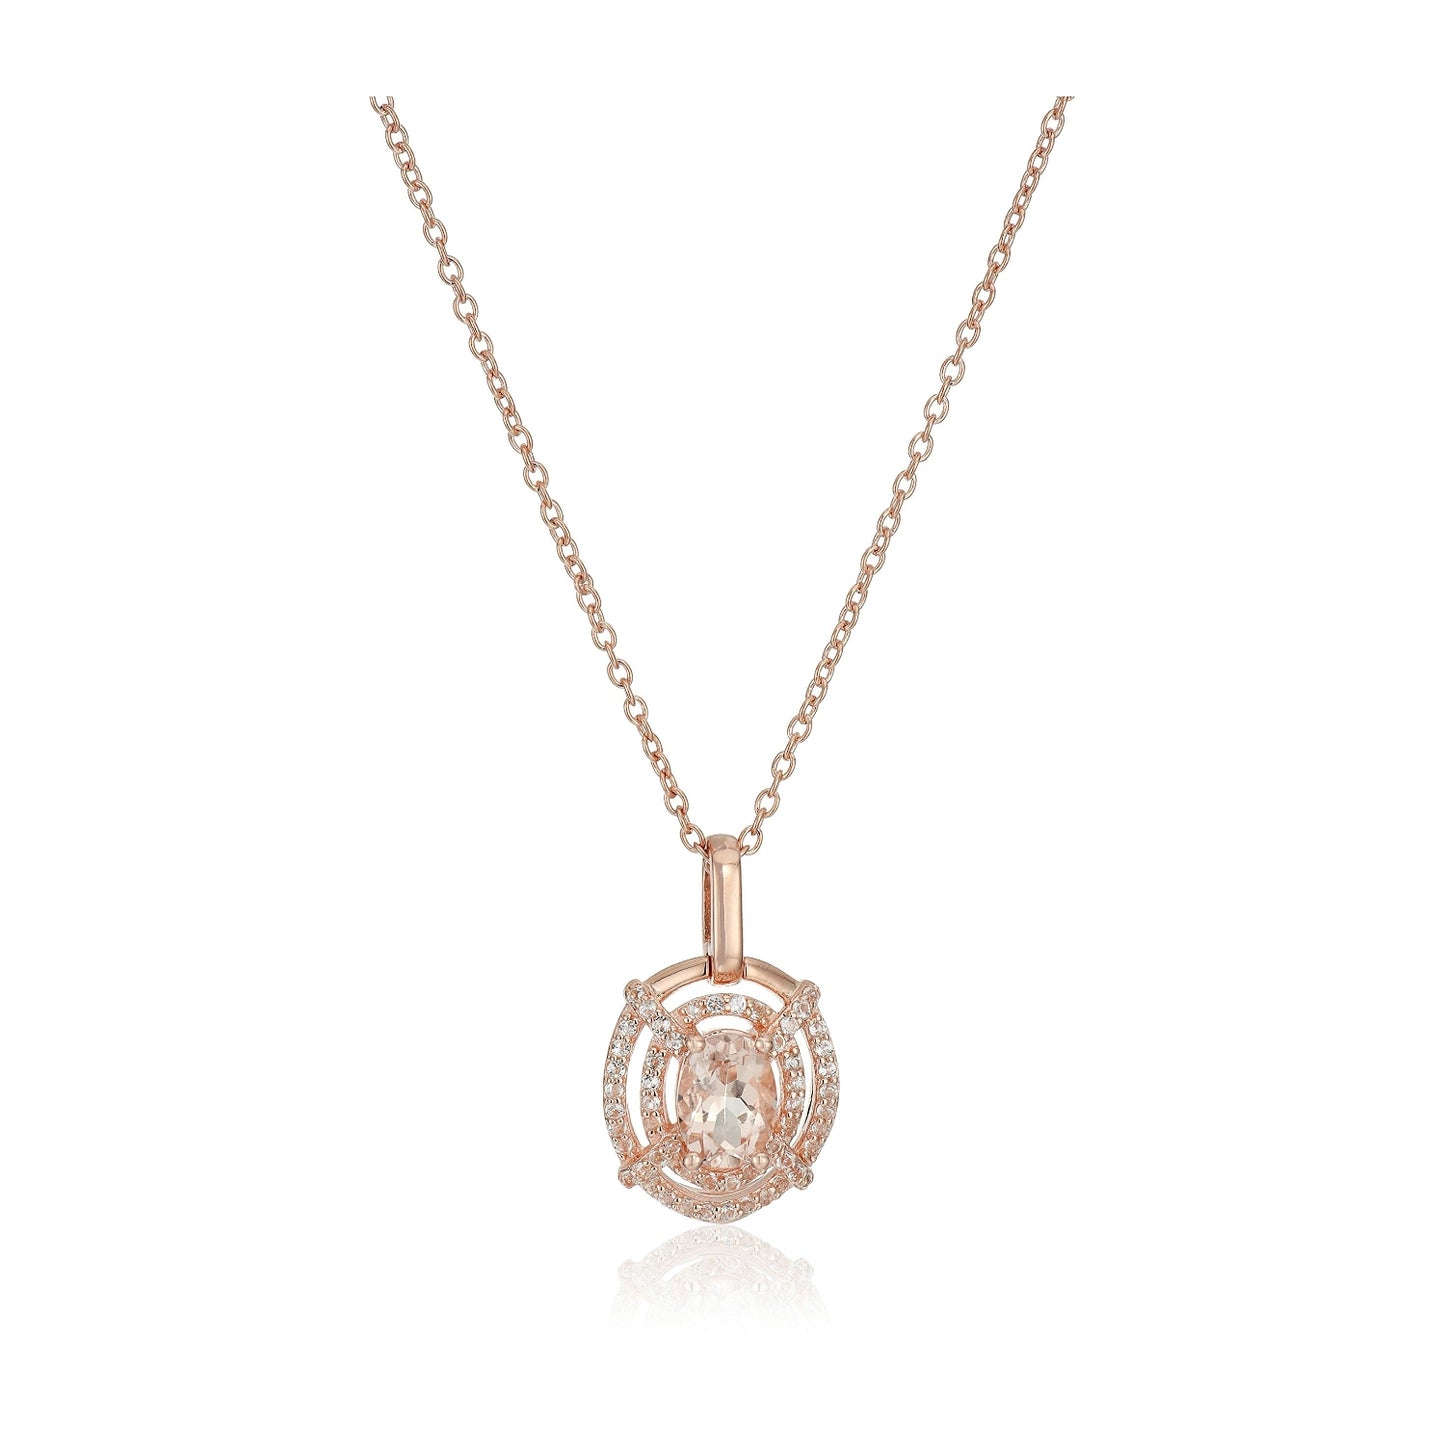 Pinctore Rose Gold-Plated Silver Morganite Oval Pendant Necklace, 18" - pinctore